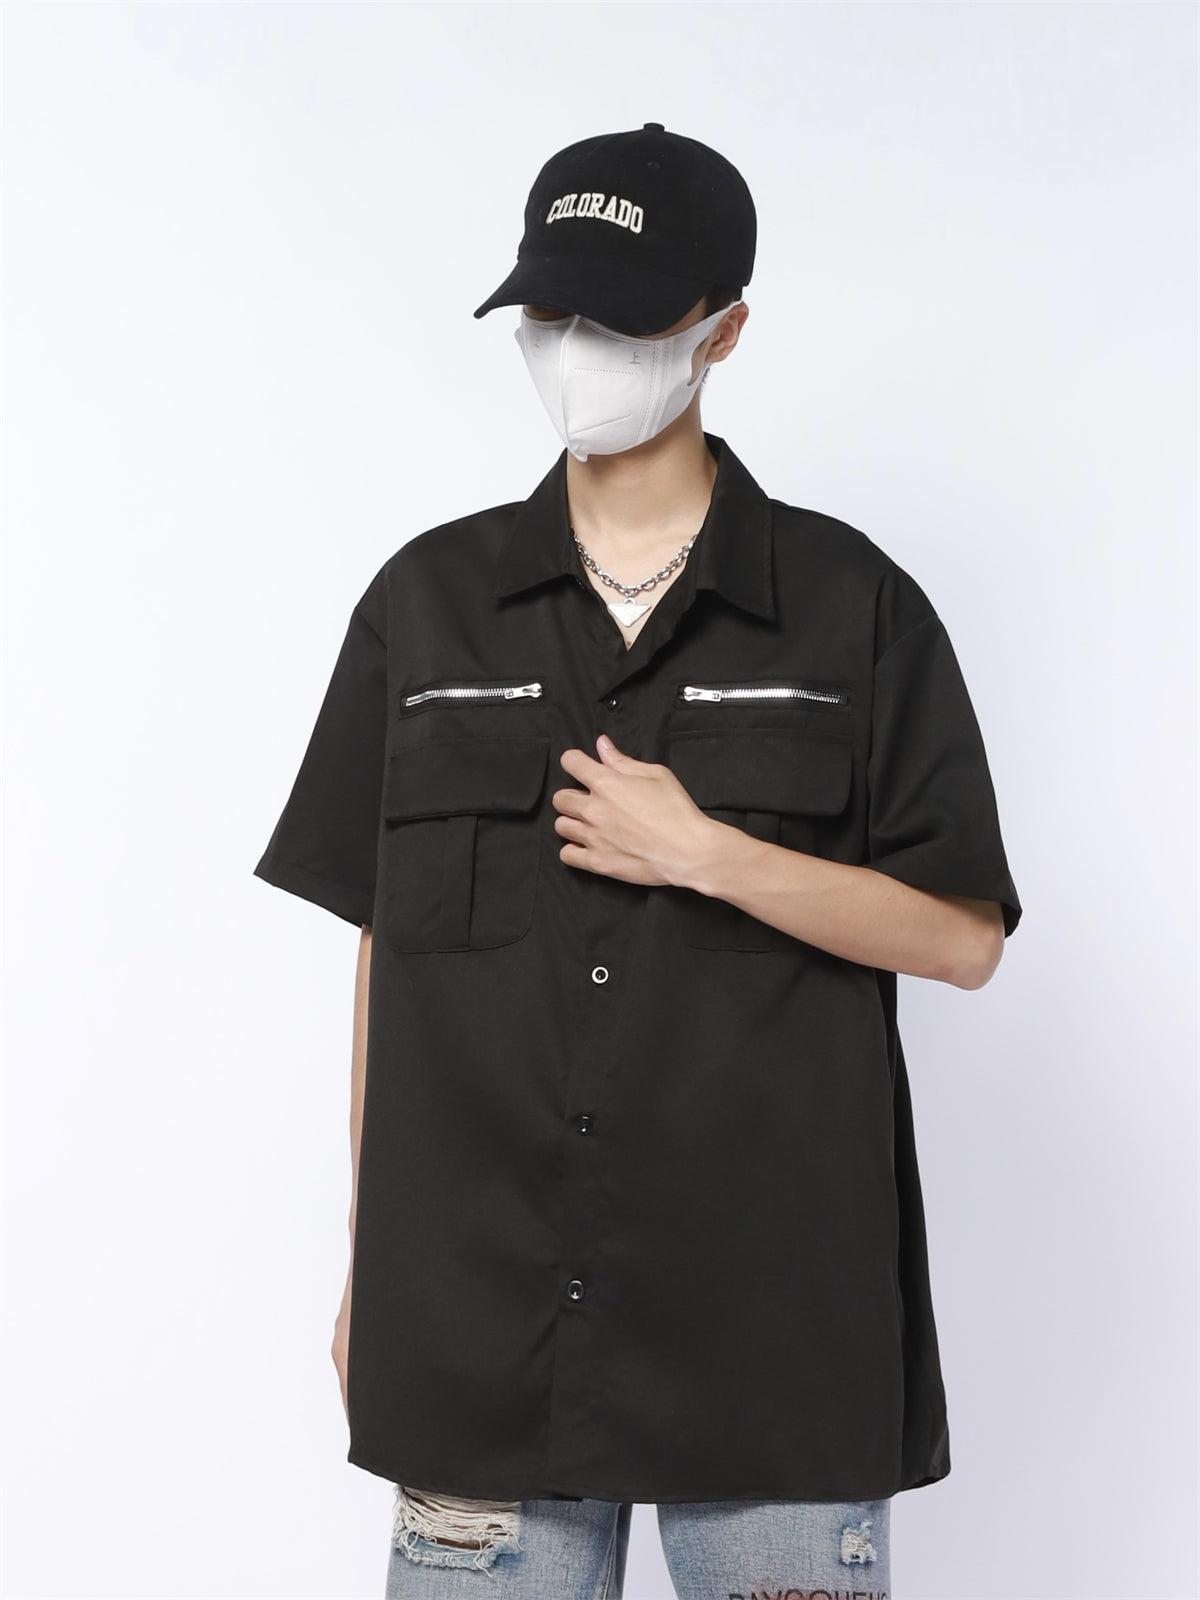 Made Extreme Multi Breast Pocket Buttoned Shirt Korean Street Fashion Shirt By Made Extreme Shop Online at OH Vault